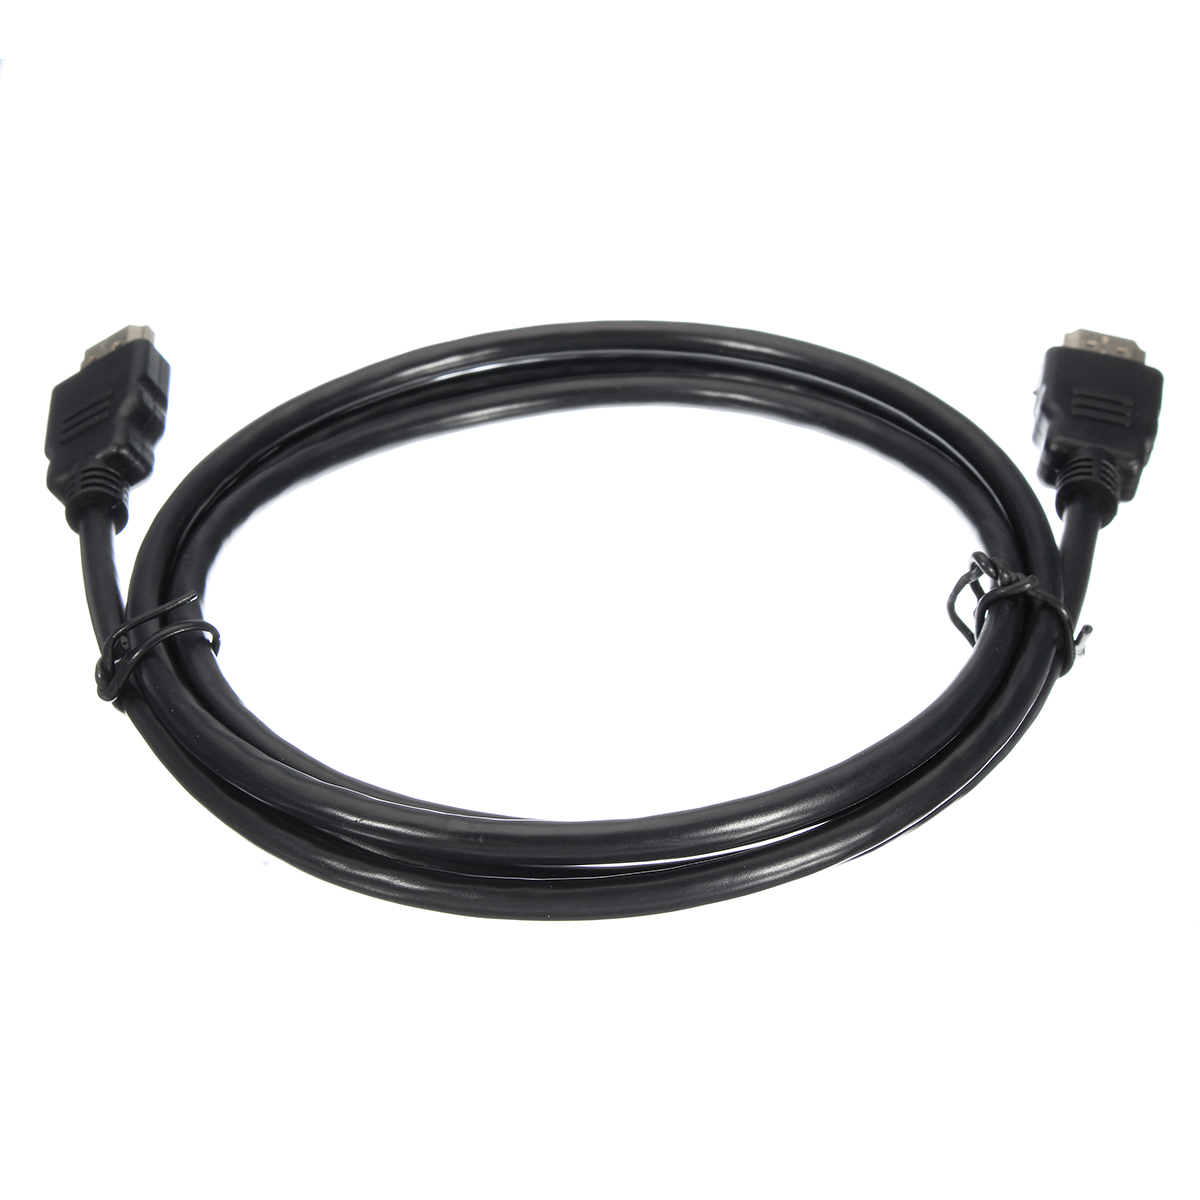 15M-High-Definition-Multimedia-Interface-Cable-Black-for-HDTV-XBox-Projectors-1225927-4